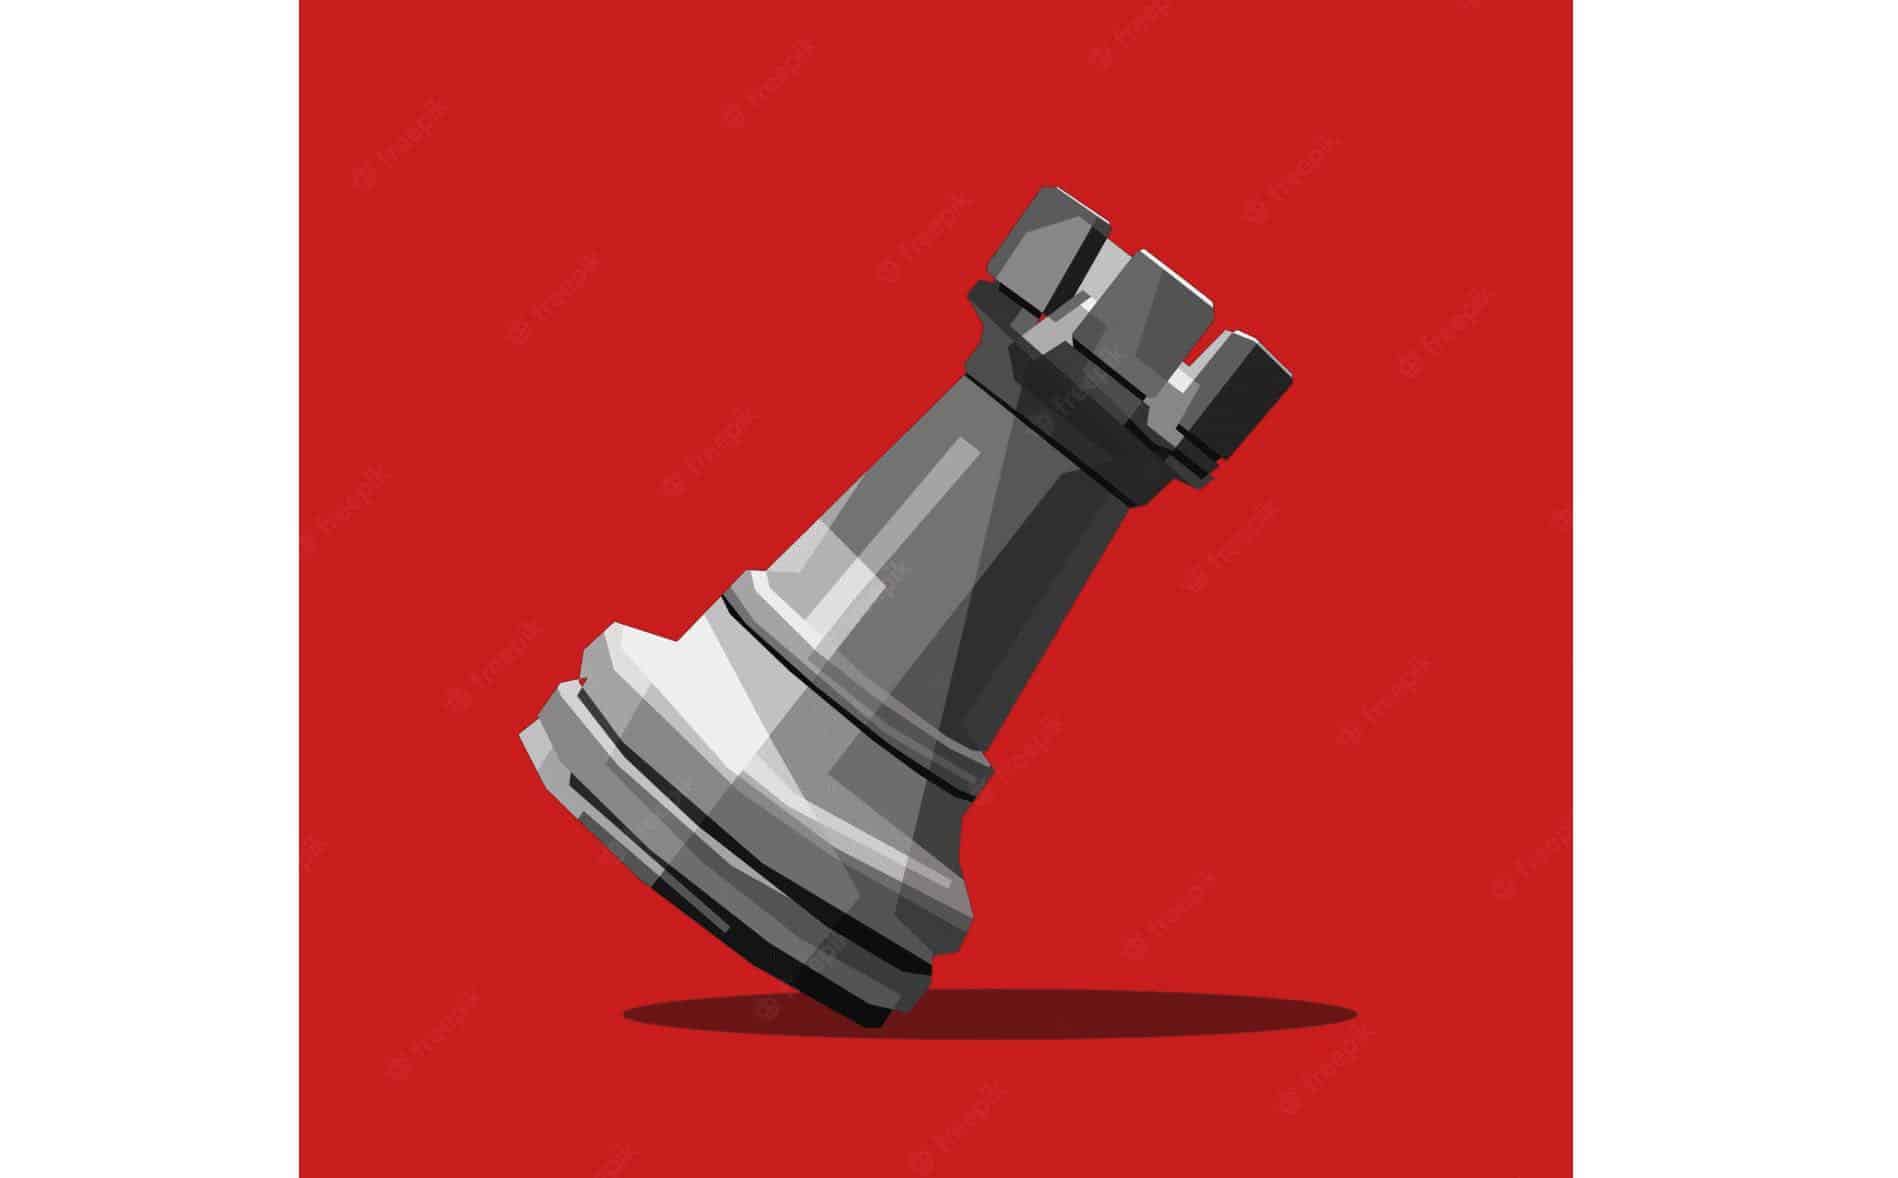 ▷ Proven: What are the chess engines and how to use them?